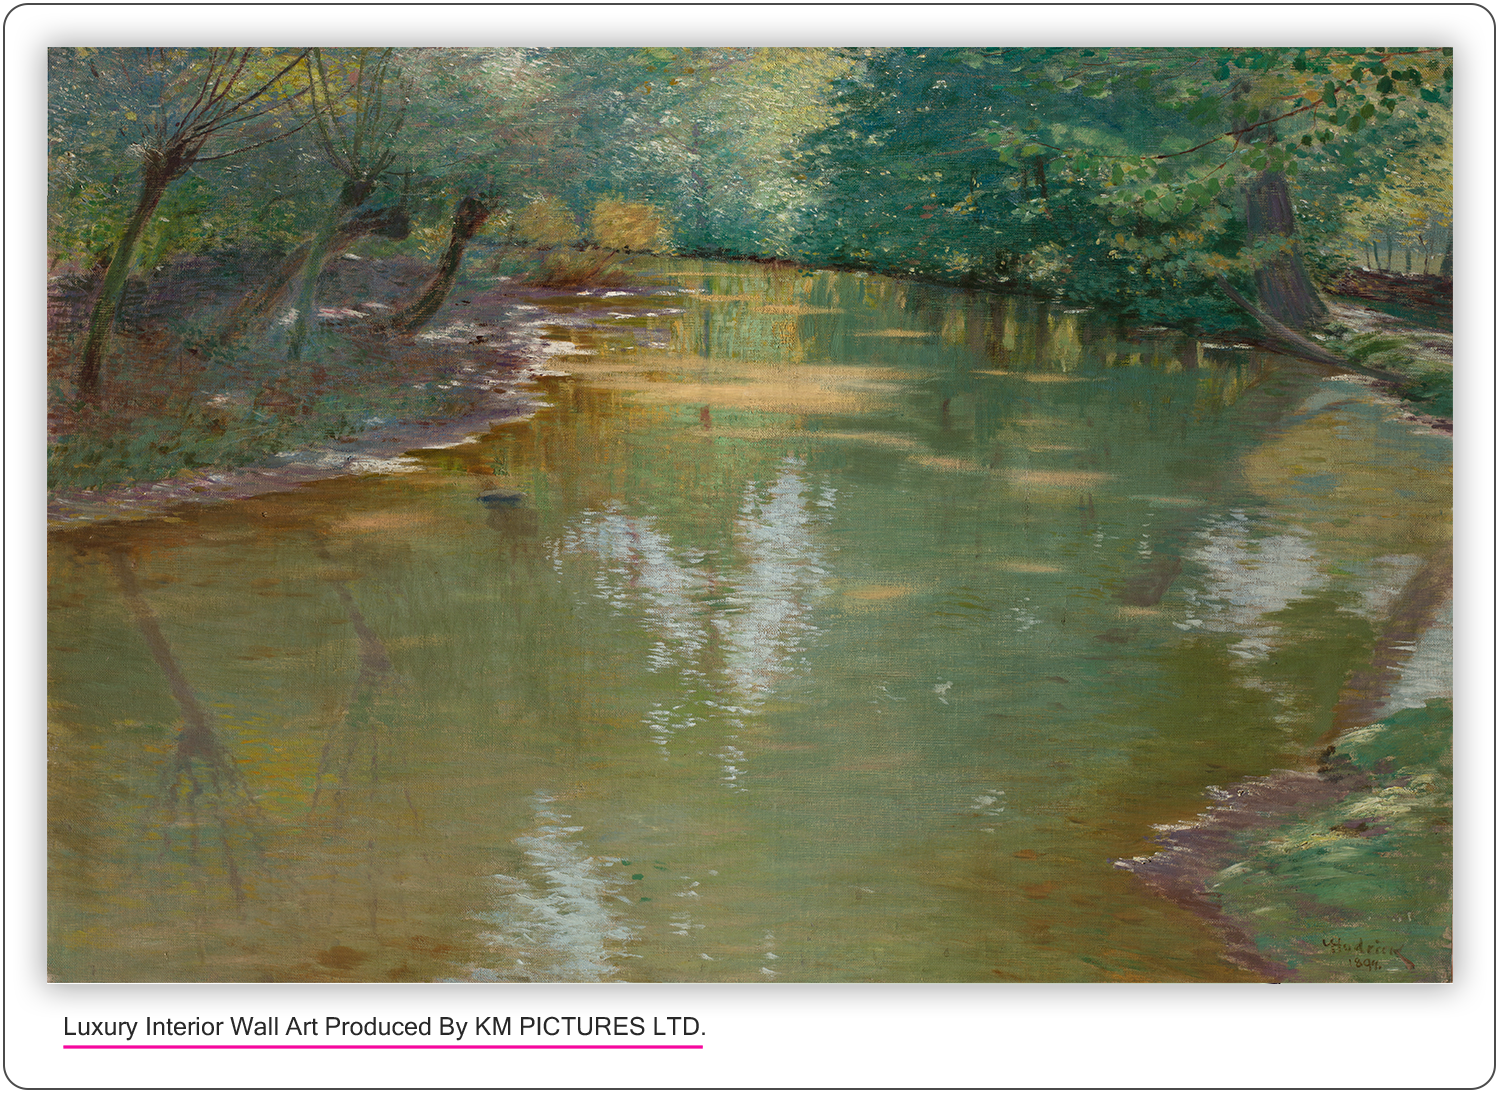 Stream in the Sunshine (Pool in the Woods), 1894